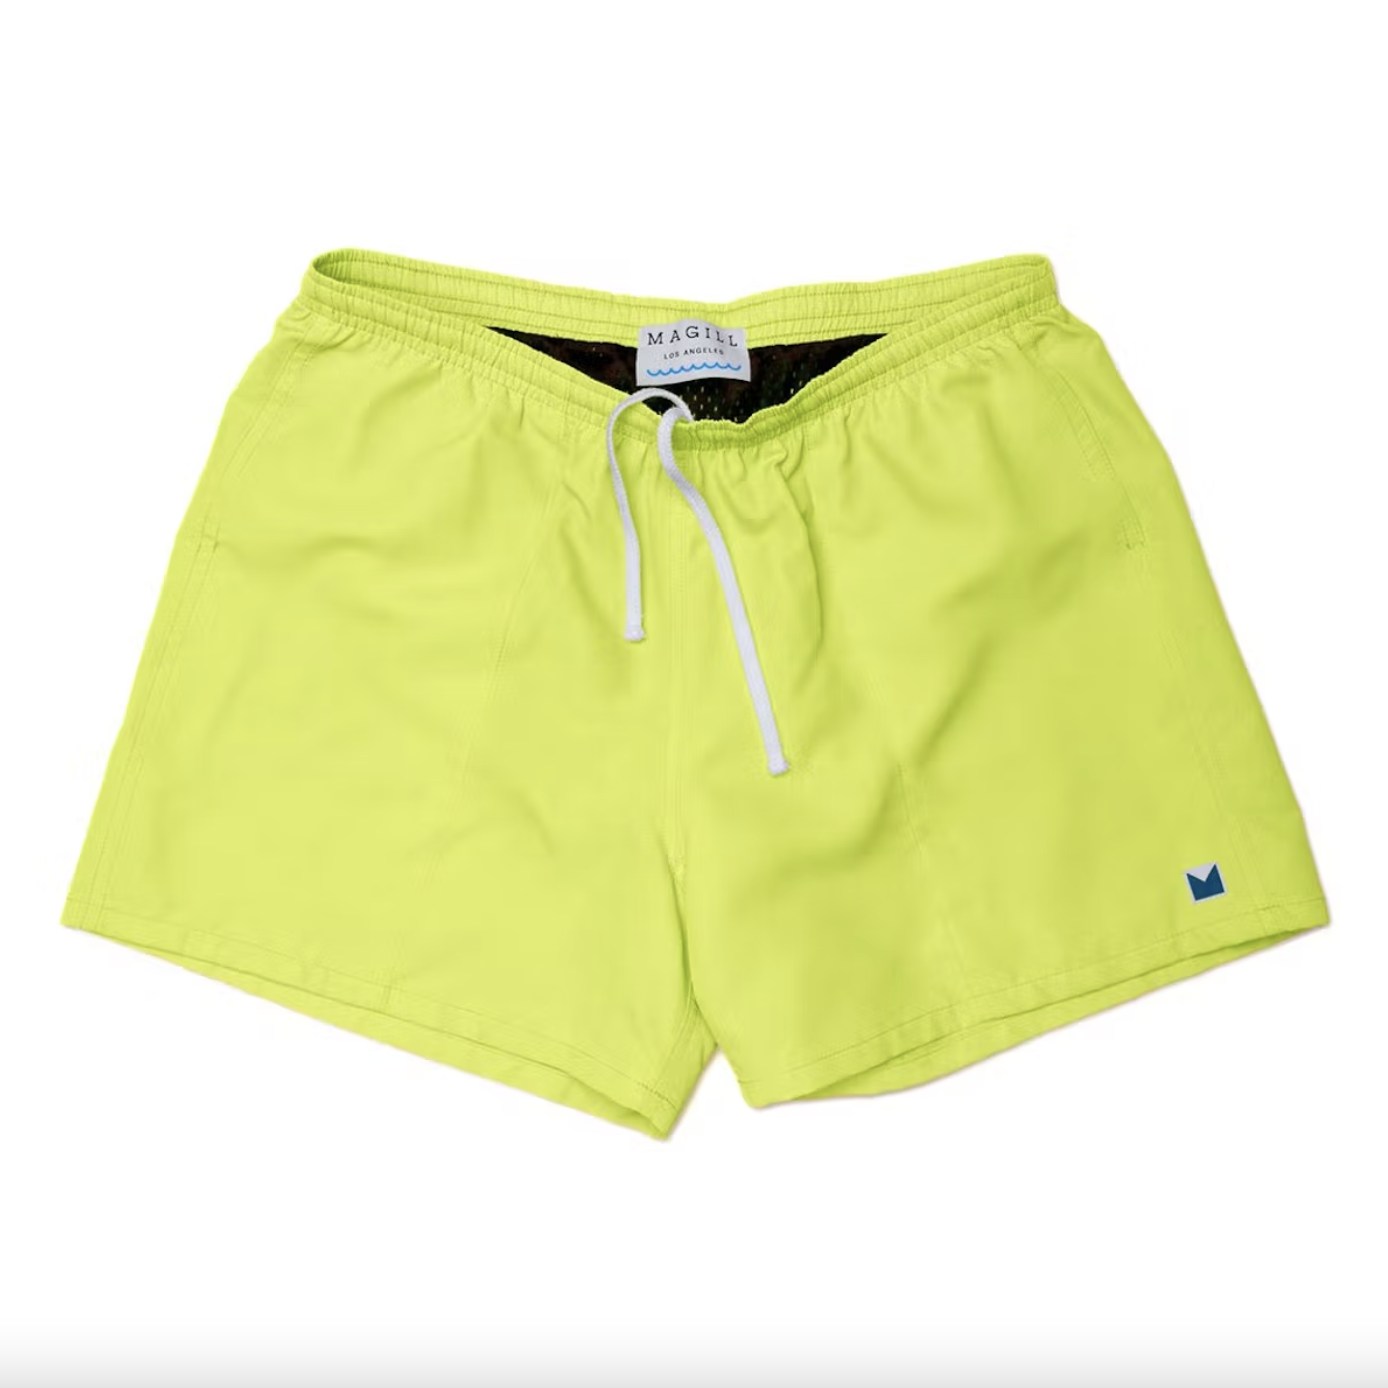 Summer's Not Over Yet: Save Up To 45% Off Swim Shorts From Huckberry ...